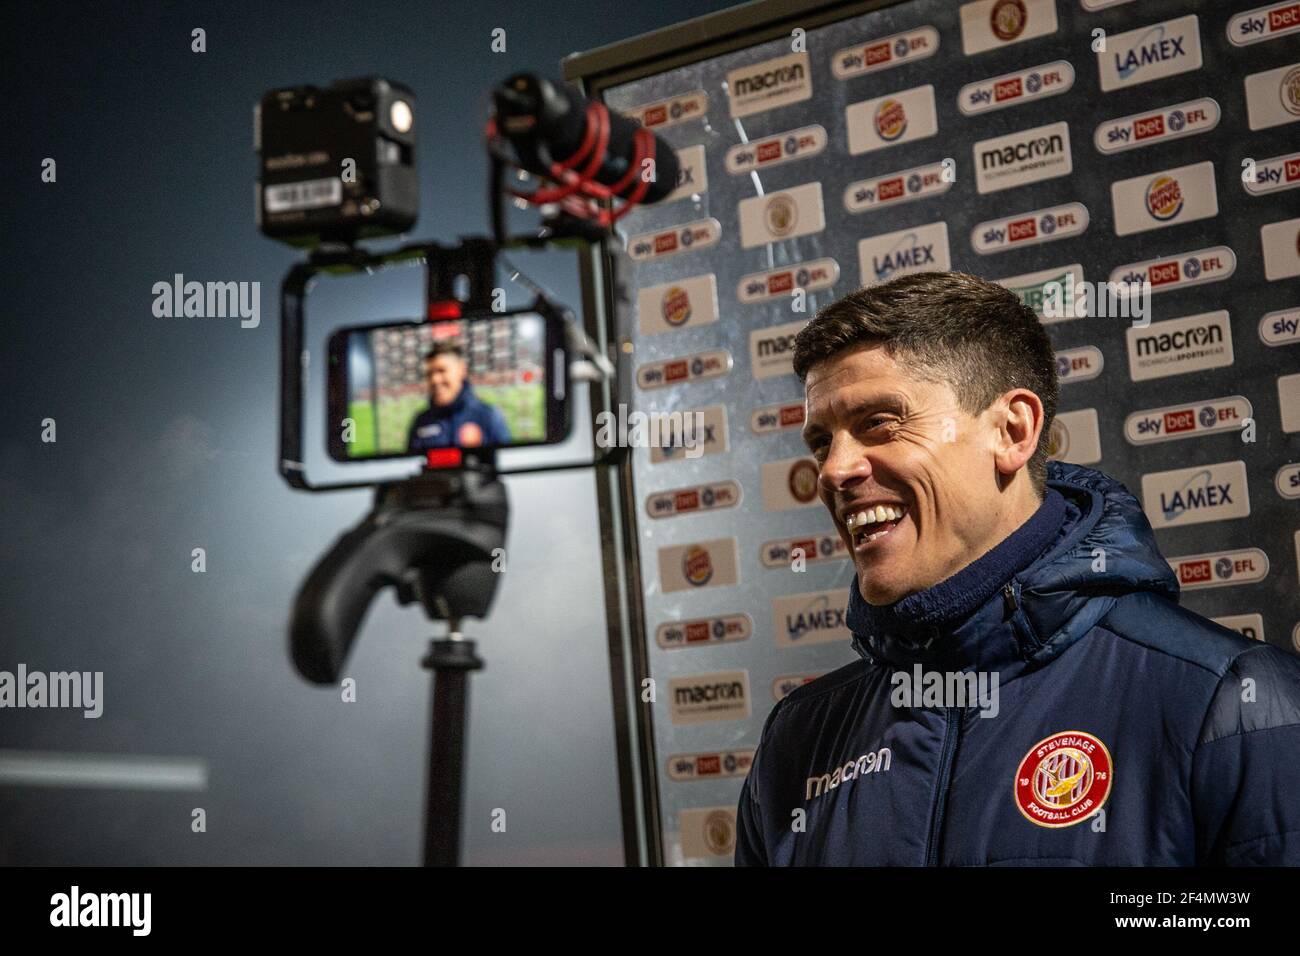 Football coach Alex Revell smiles during end of match press conference at Lamex Stadium, home of Stevenage Football Club Stock Photo